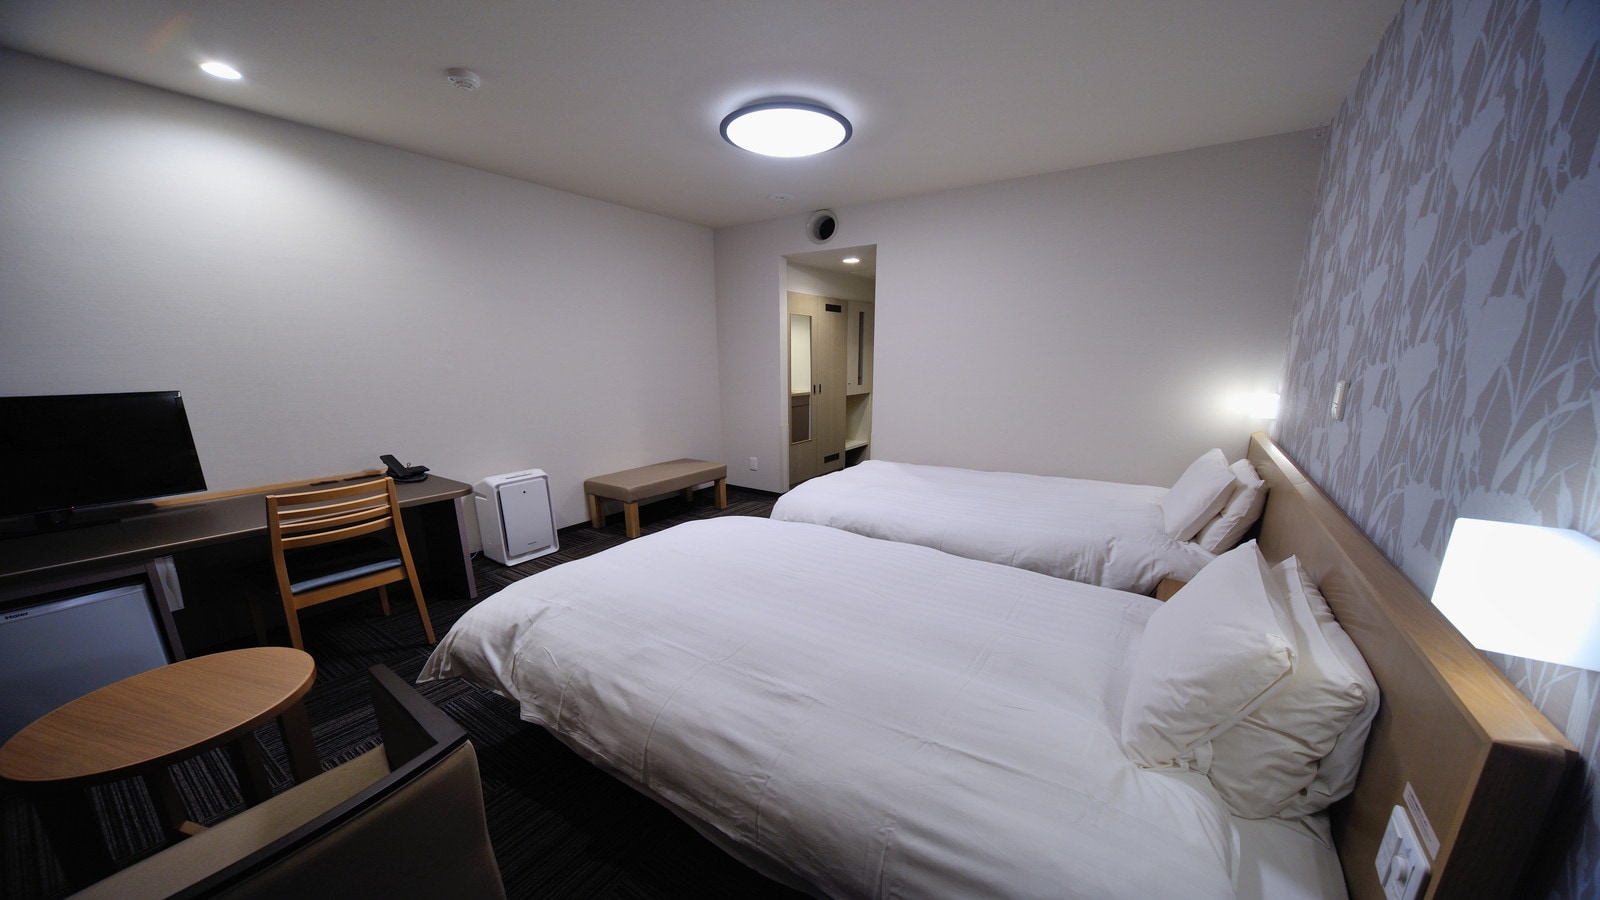 Twin room [No smoking] (110 & times; 195 cm) Approximately 19.9 to 20.3 square meters